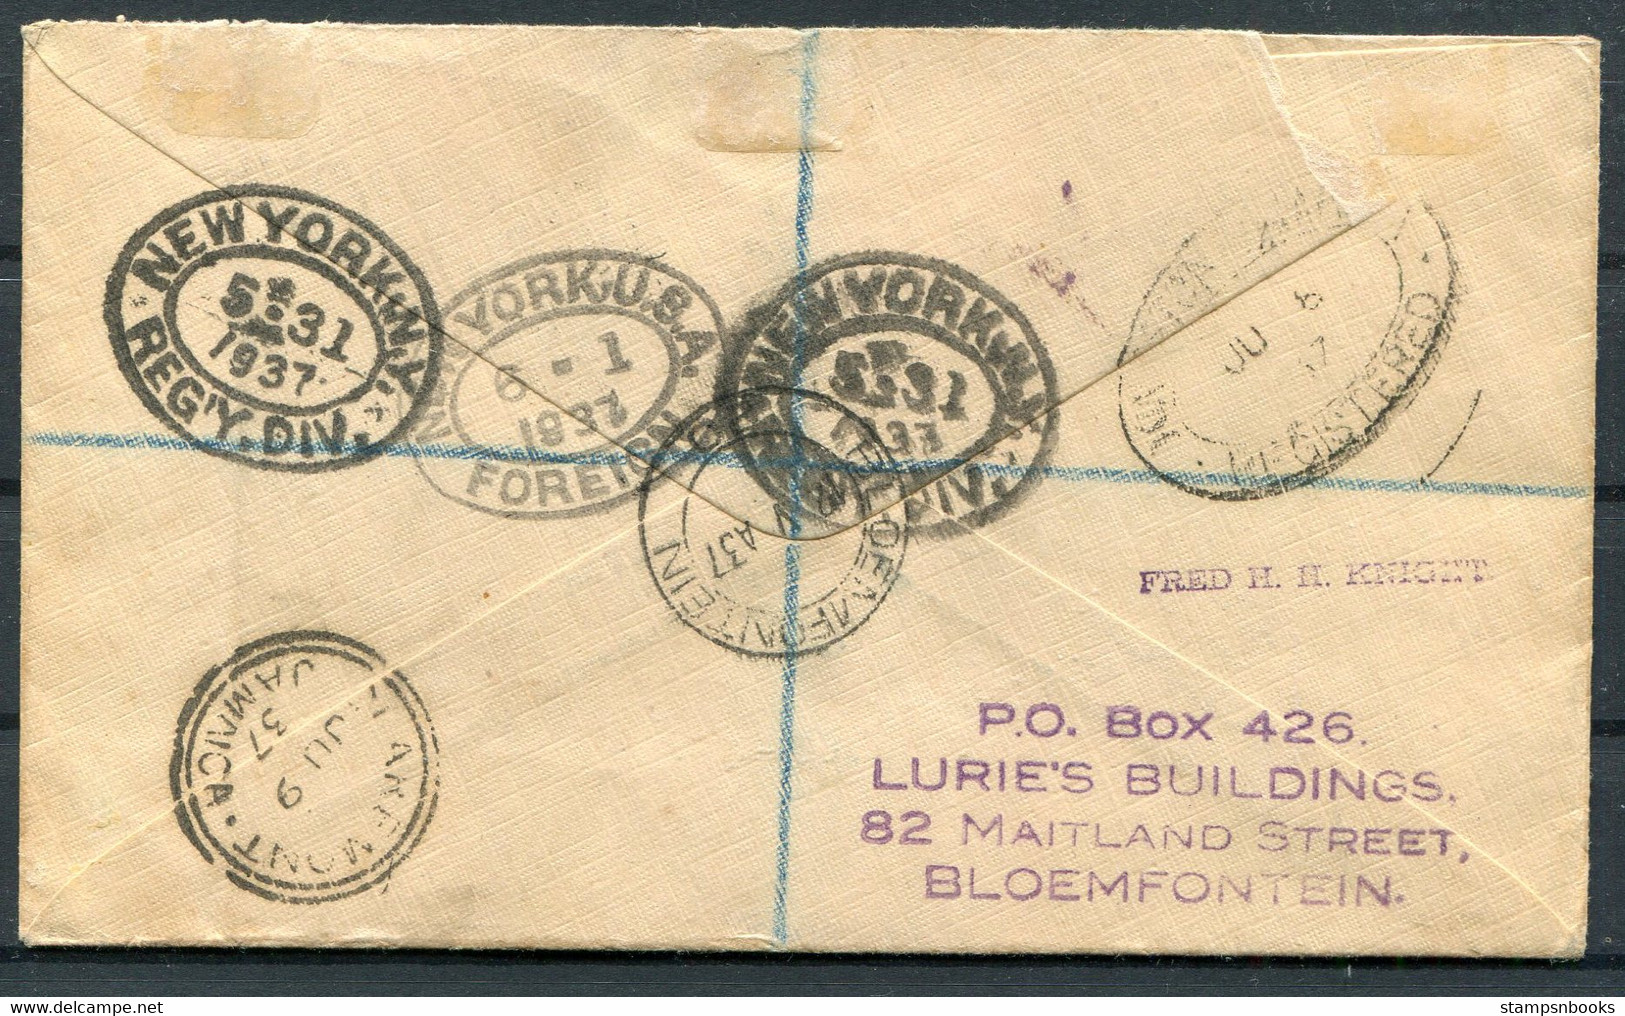 1937 South Africa Coronation First Day Cover, Registered Airmail Bloemfontein - Claremont Jamaica - Luchtpost